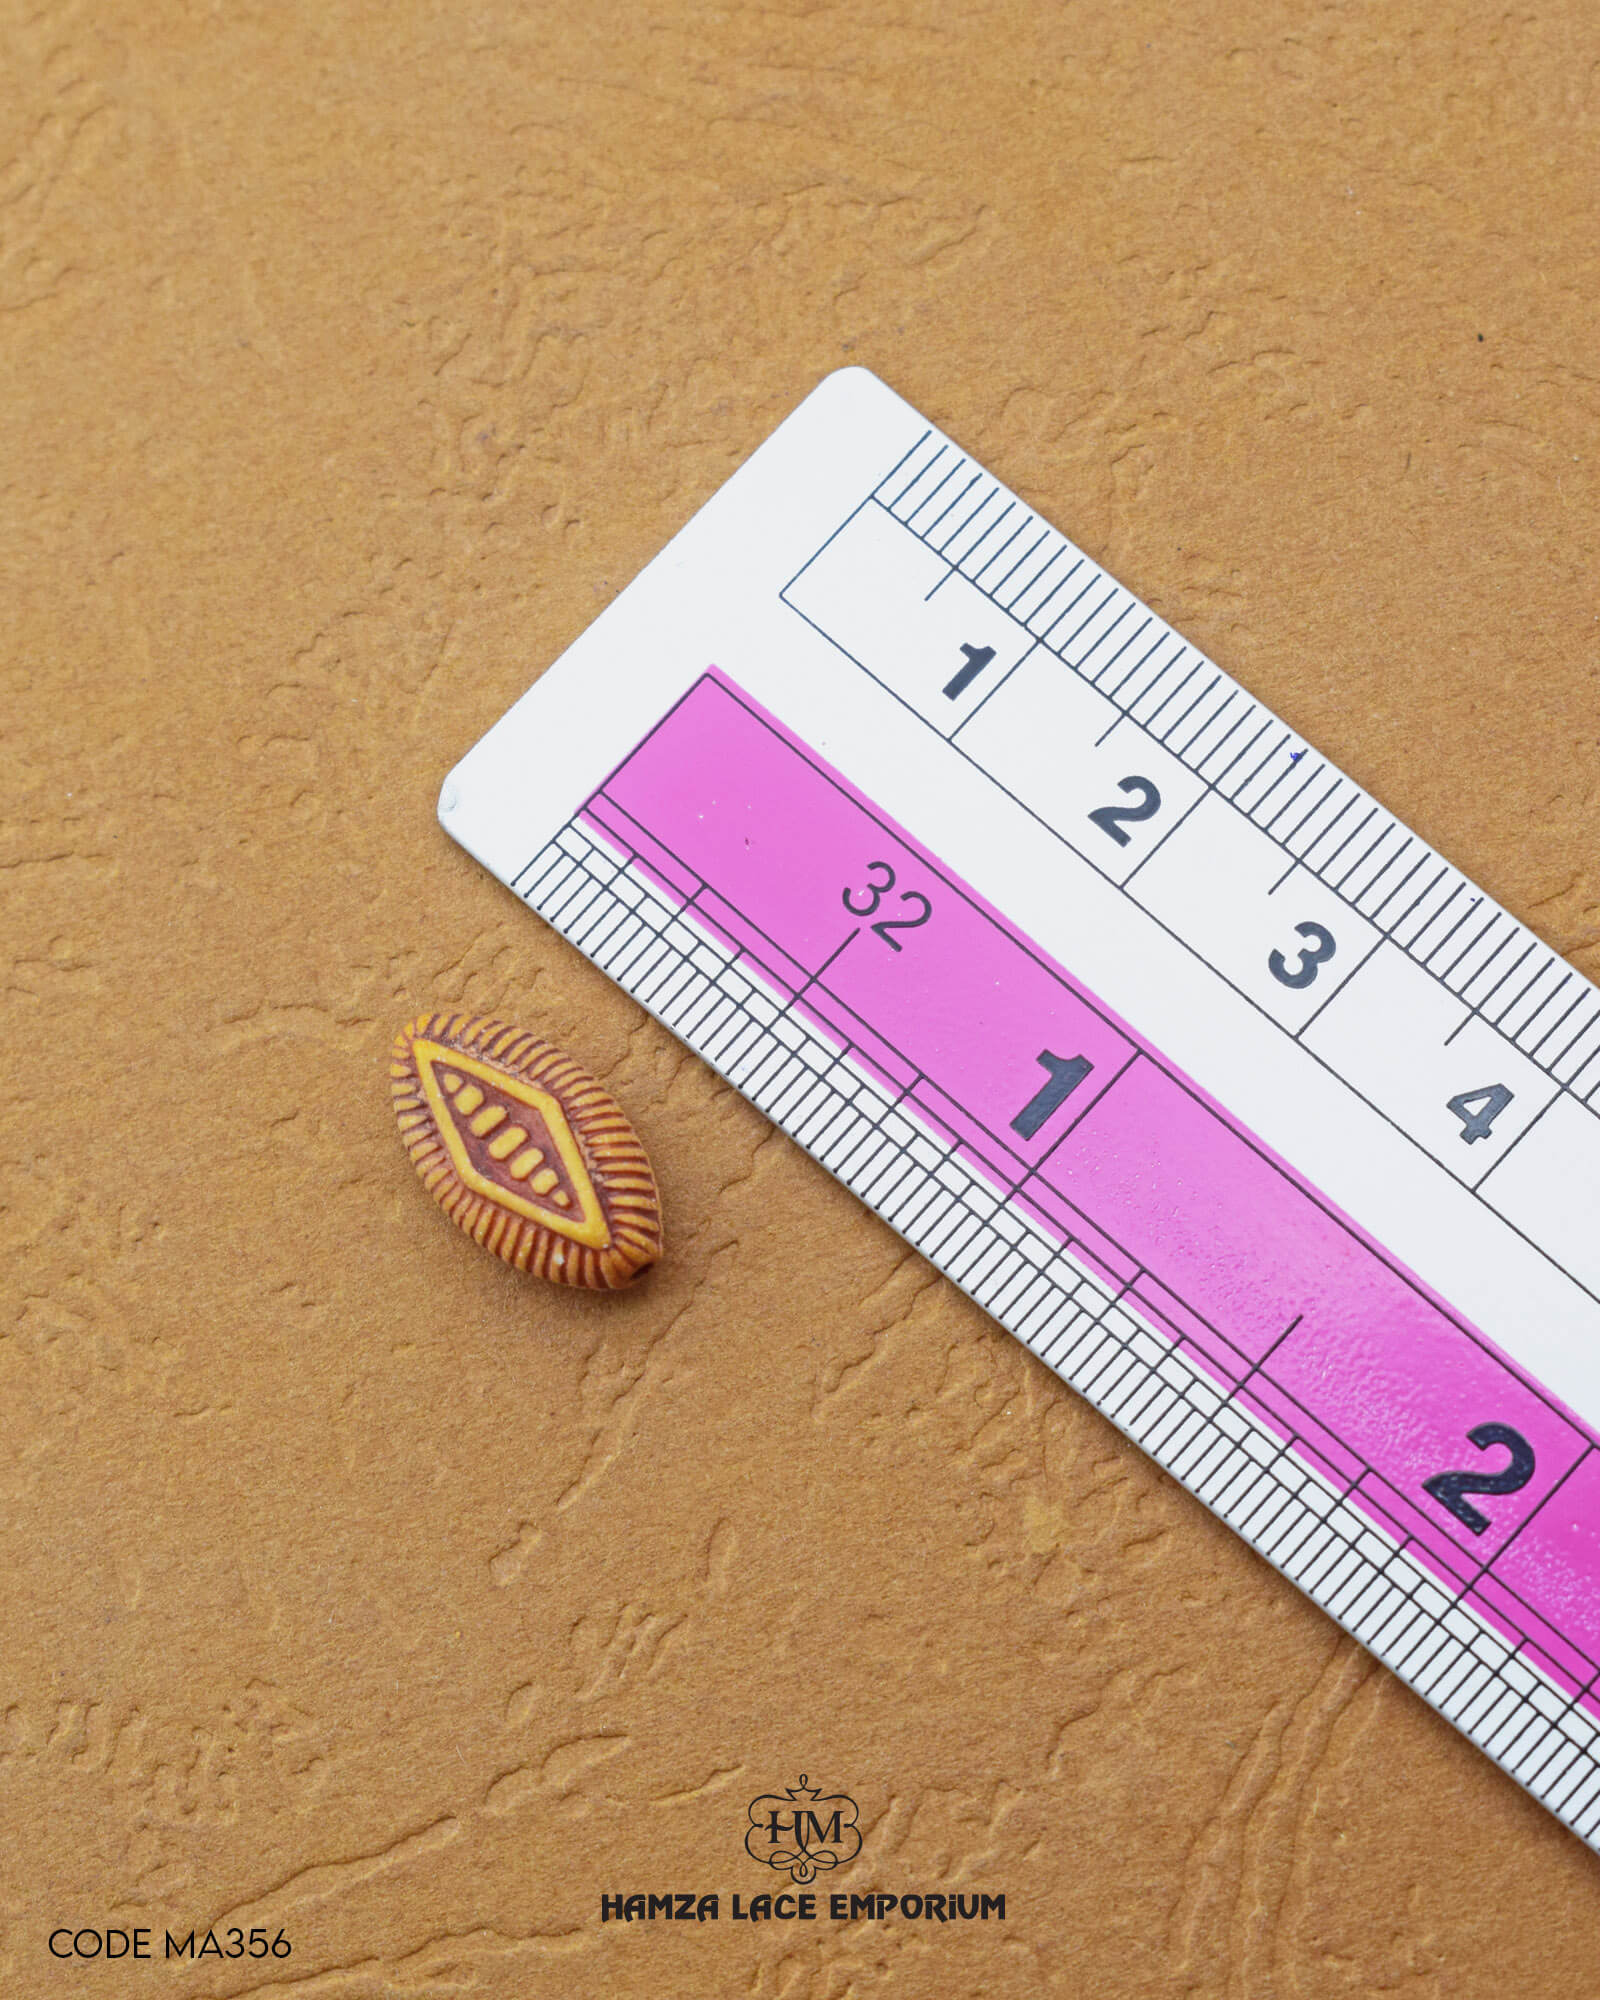 'Kite Shape Button MA356' with a ruler placed alongside it to showcase the size.